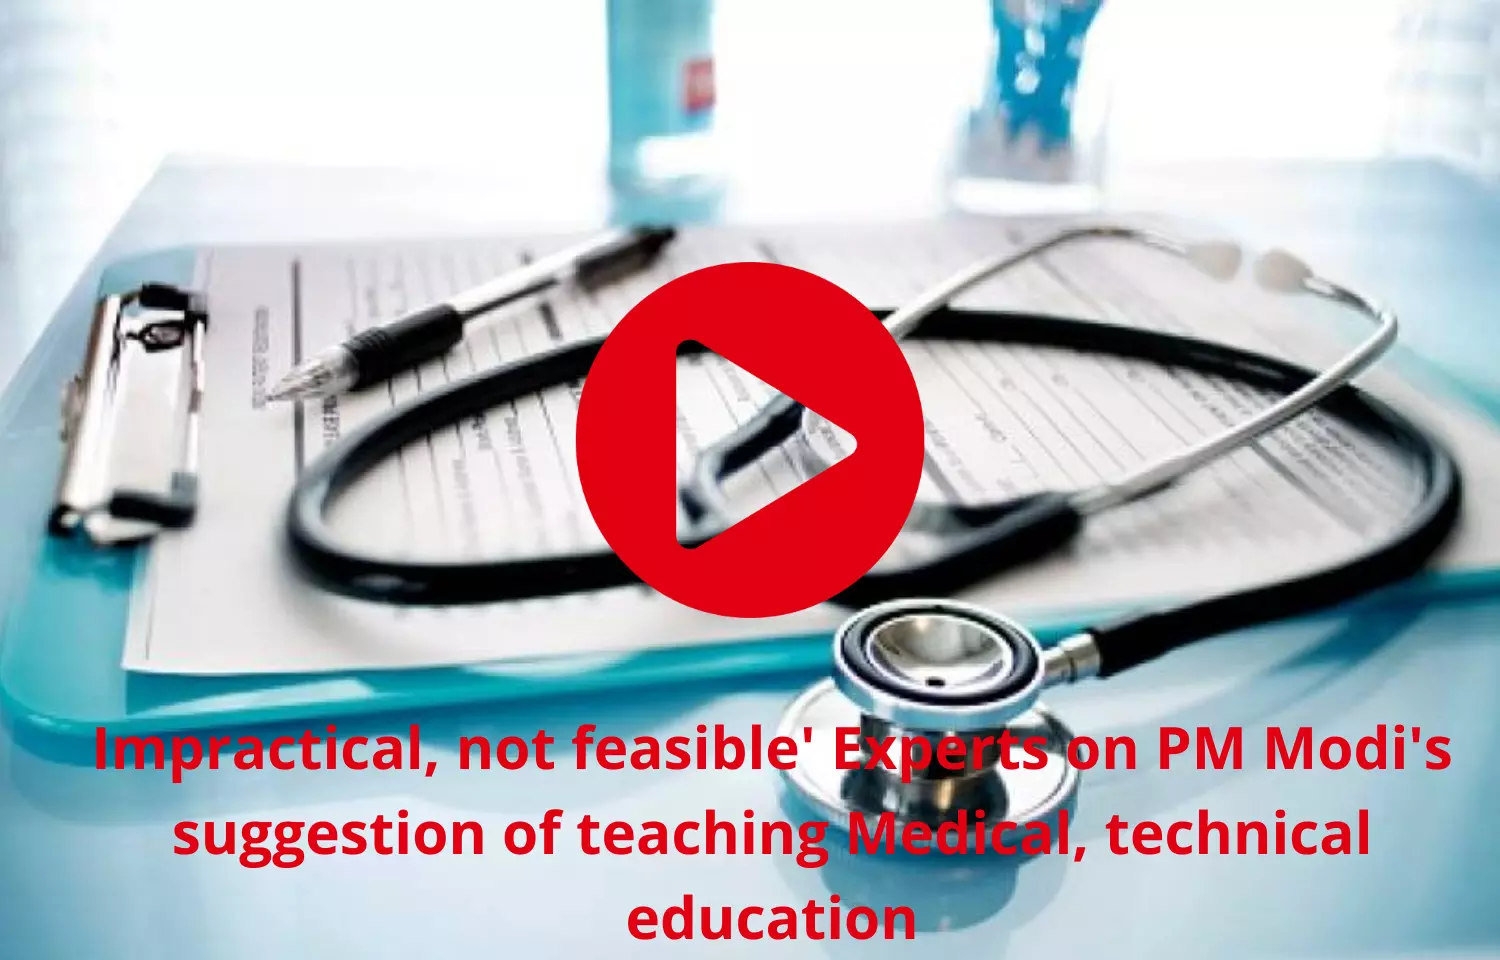 Impractical, not feasible Experts on PM Modis suggestion of teaching Medical, technical education